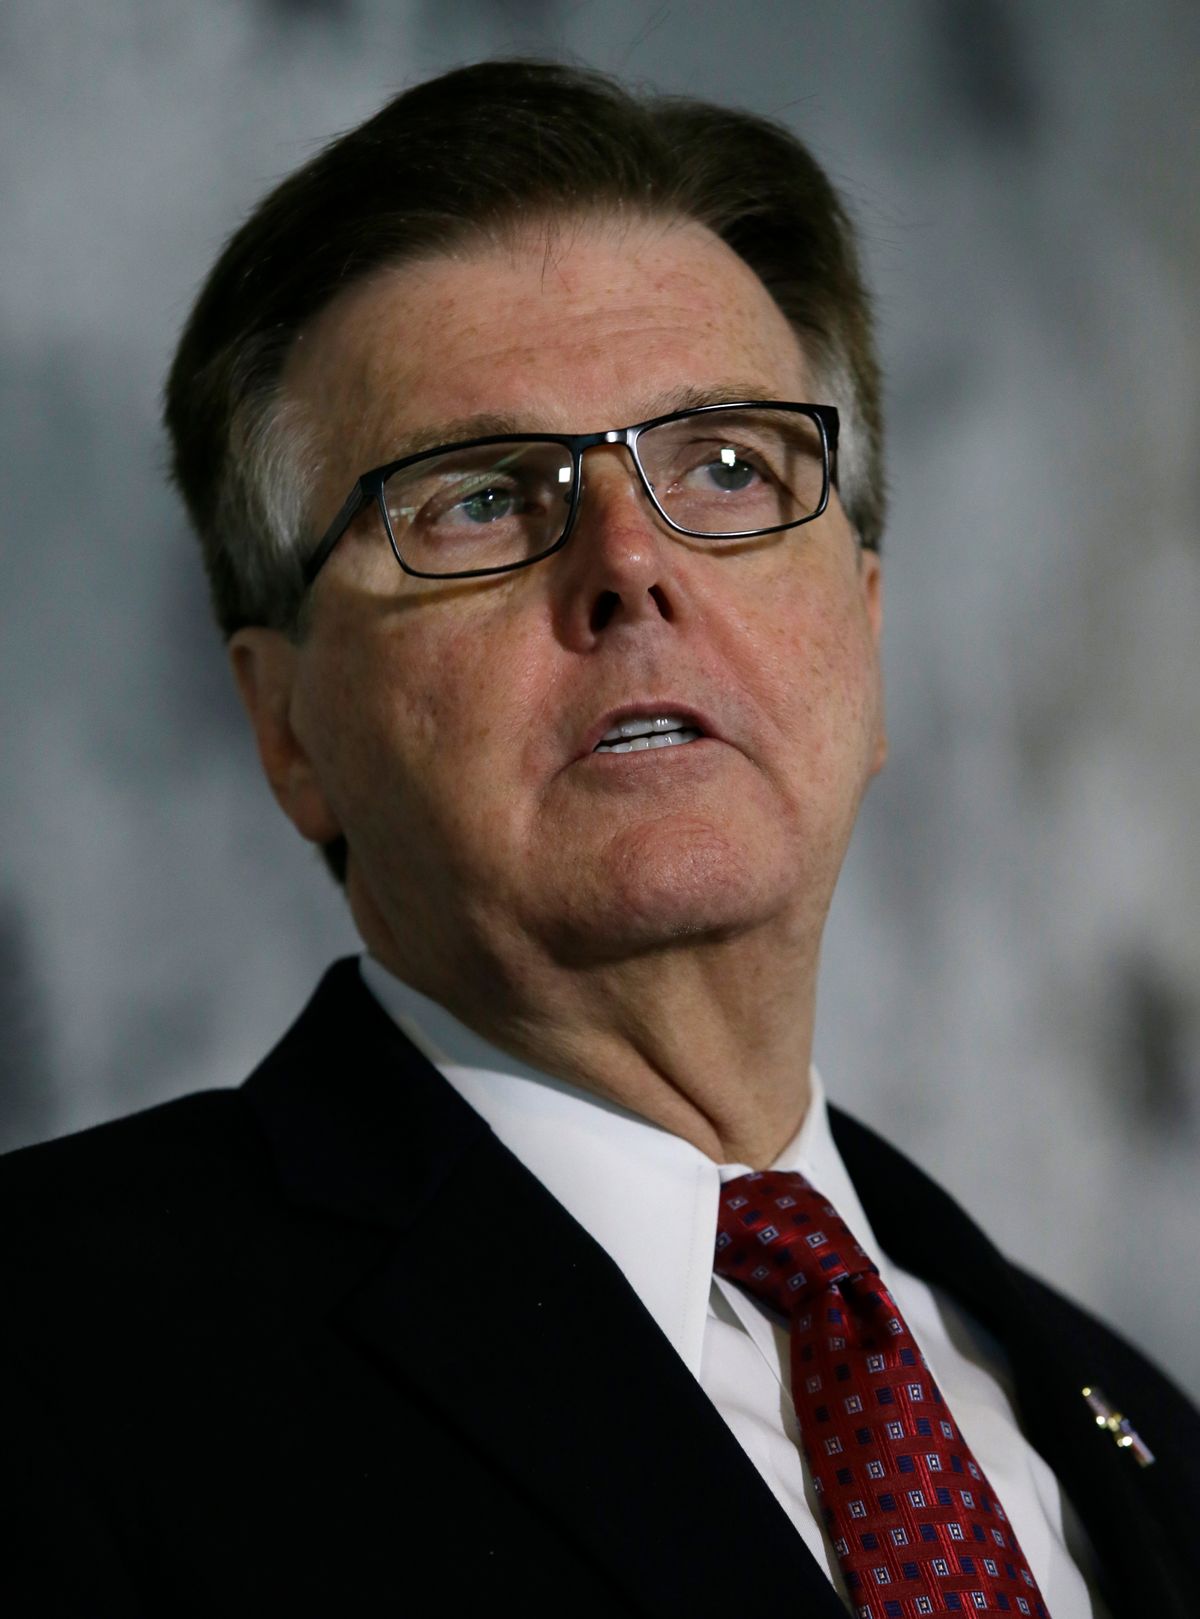 Texas Lt. Gov. Dan Patrick speaks during a news conference at the Texas Republican Convention Friday, May 13, 2016, in Dallas. Texas is signaling the state will challenge an Obama administrative directive over bathroom access for transgender students in public schools. (AP Photo/LM Otero) (AP Photo/LM Otero)